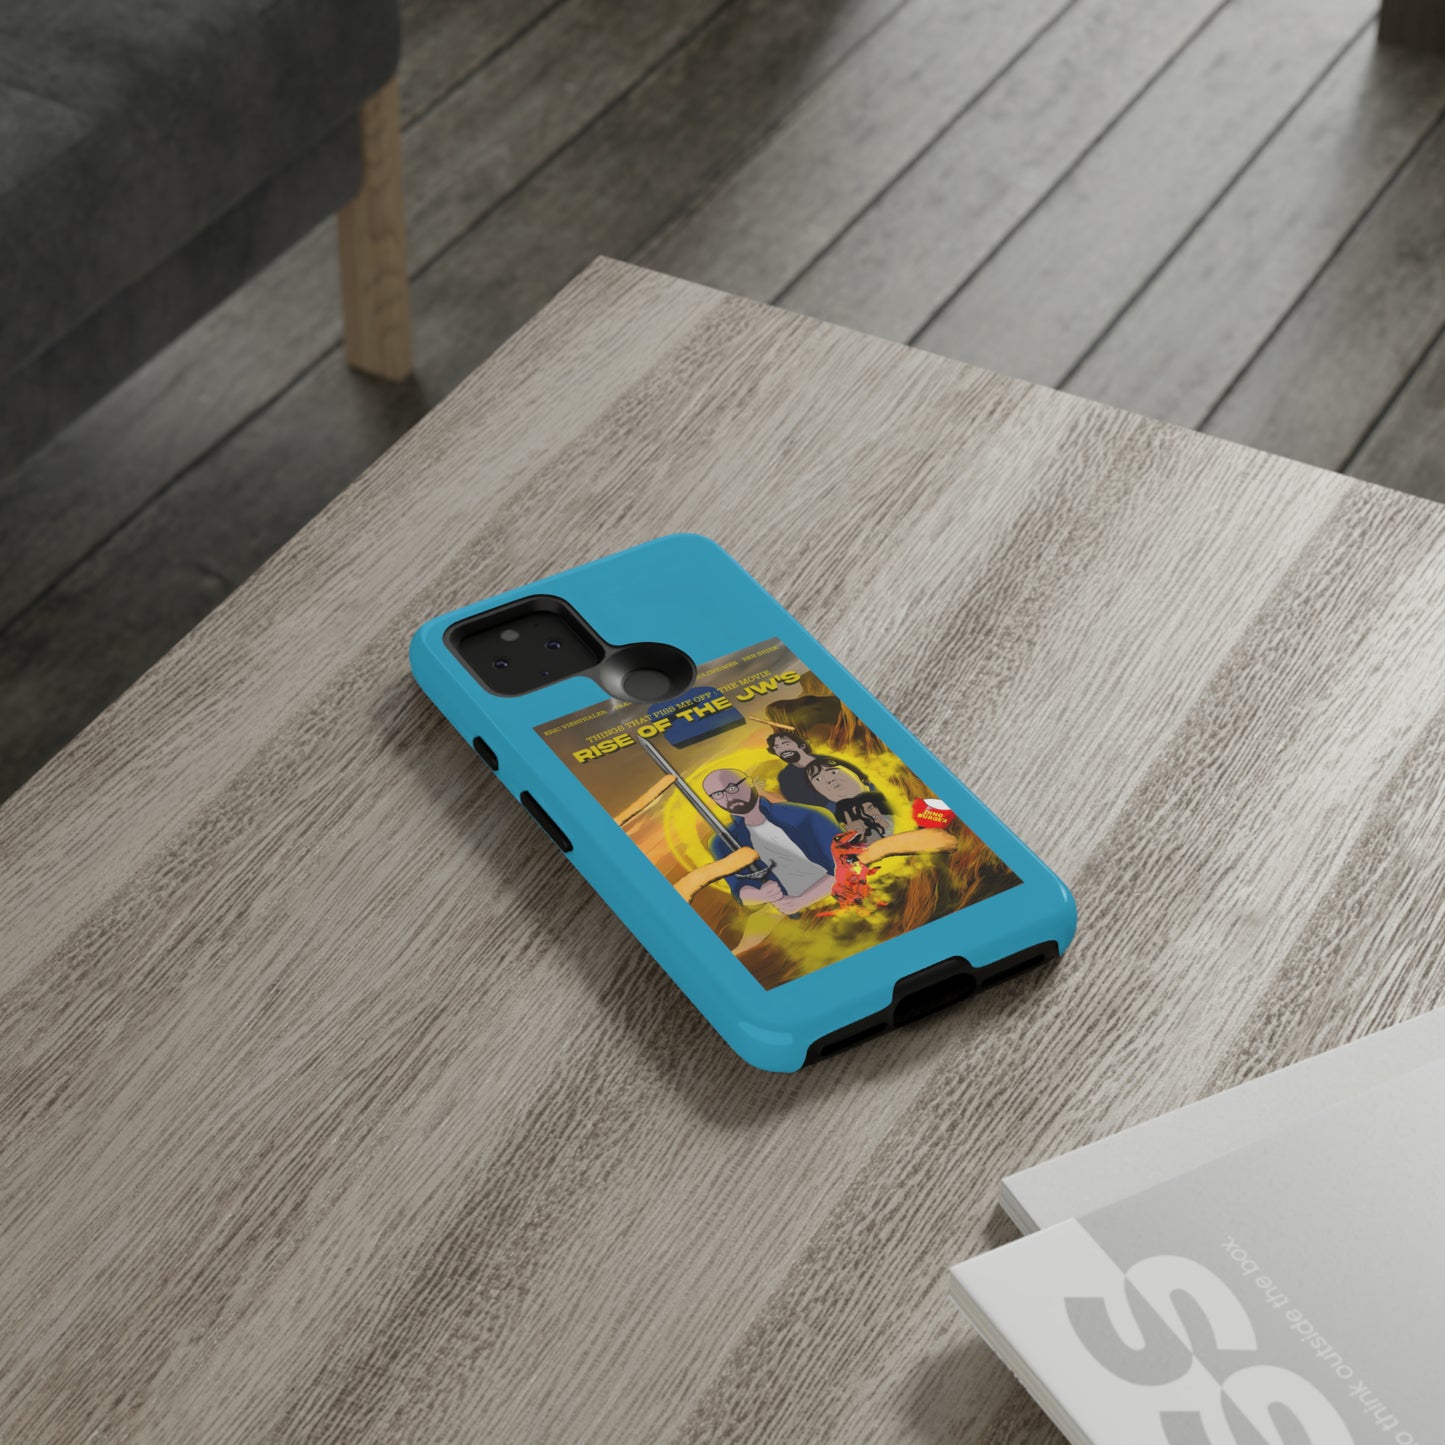 Rise Of The JW's Tough Phone Case (turquoise)